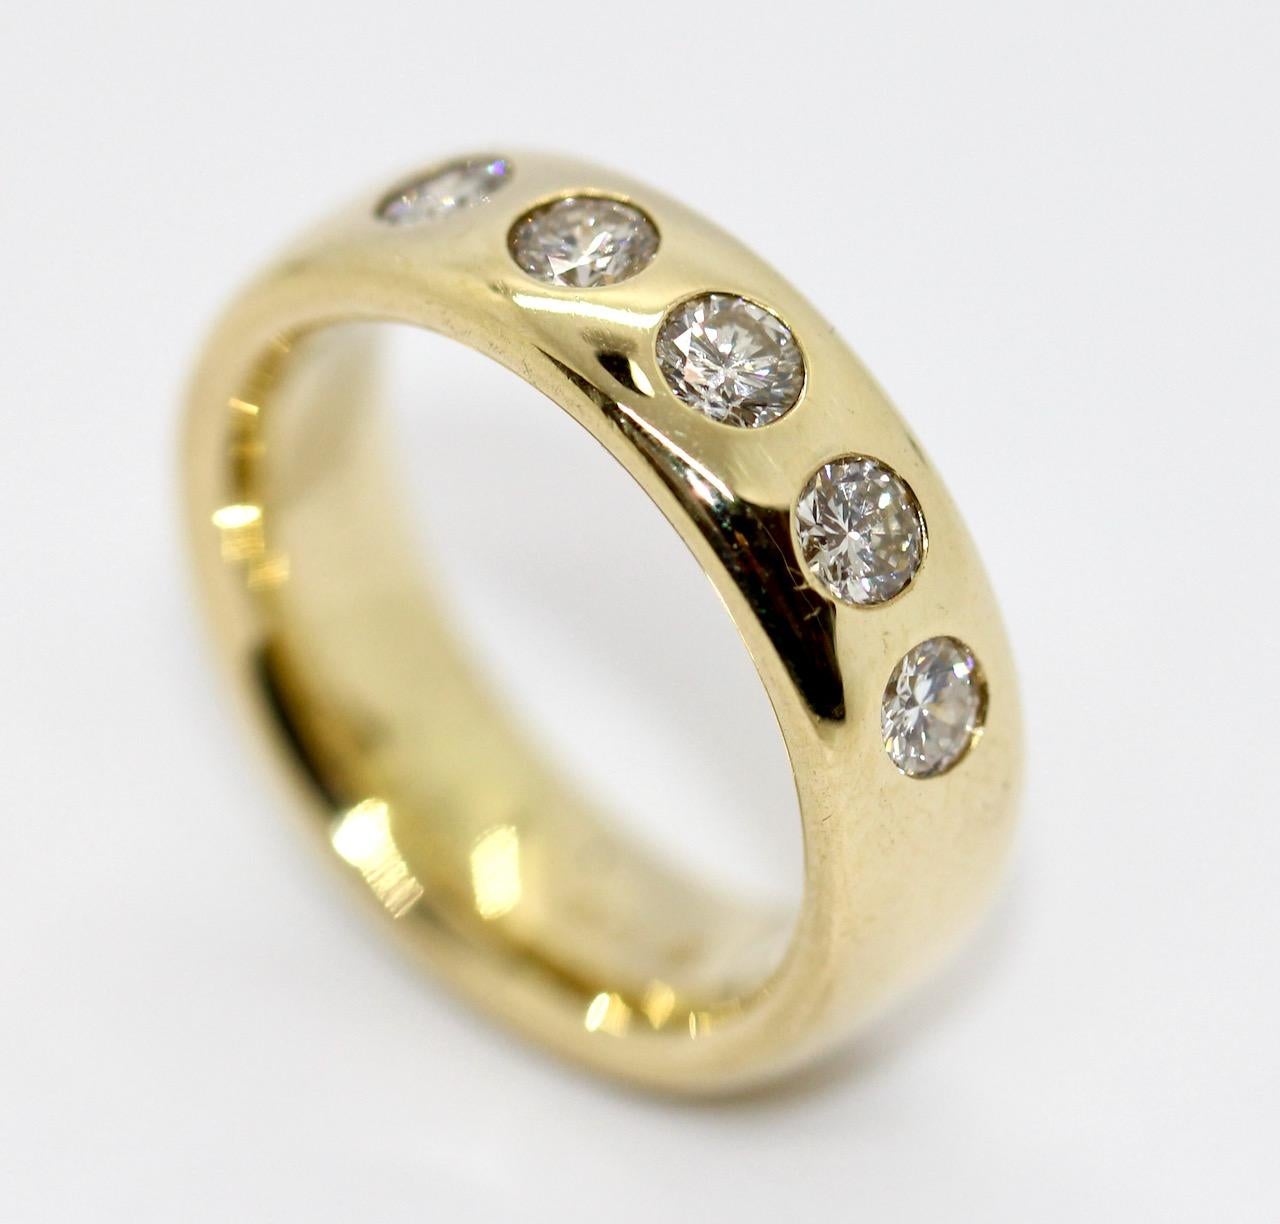 14k yellow gold ring set with five diamonds.

Beautiful, solid women's ring set with five brilliant-cut diamonds. 
The diamonds have a strong, natural shine.
Total weight of the stones approx. 0.8 to 1.0 carat.

Includes certificate of authenticity.